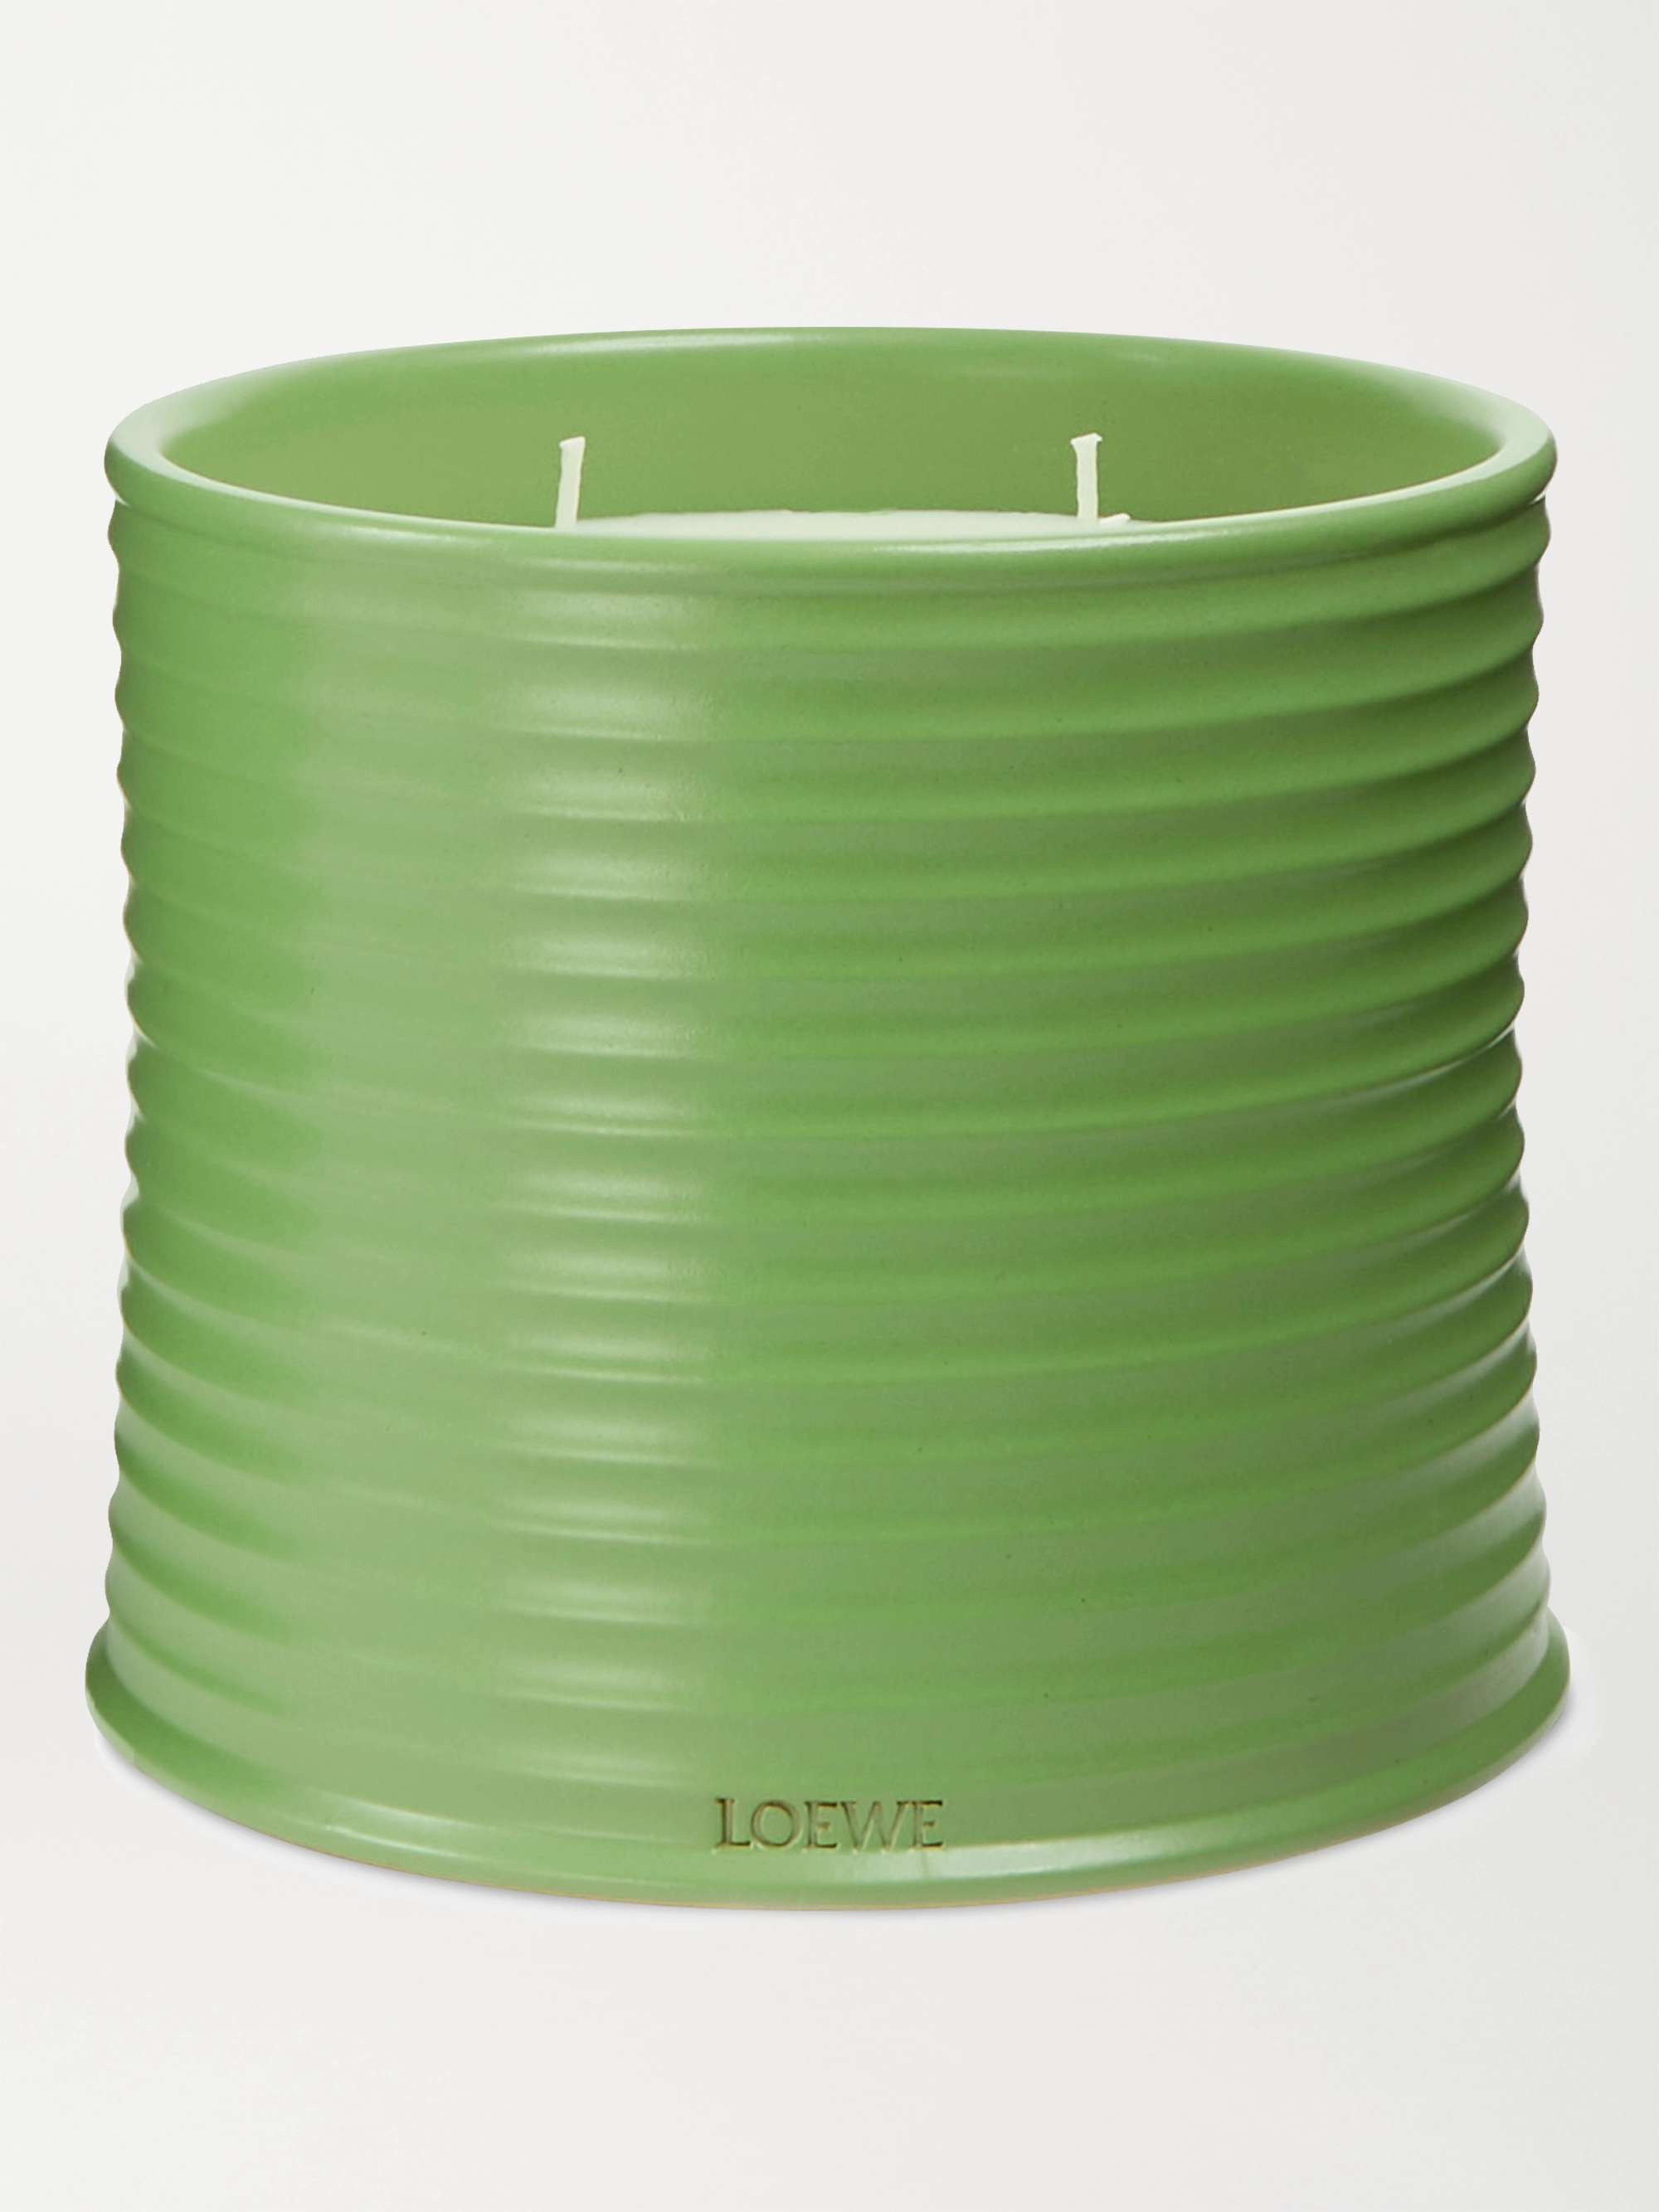 LOEWE HOME SCENTS Luscious Pea Scented Candle, 2120g for Men | MR PORTER